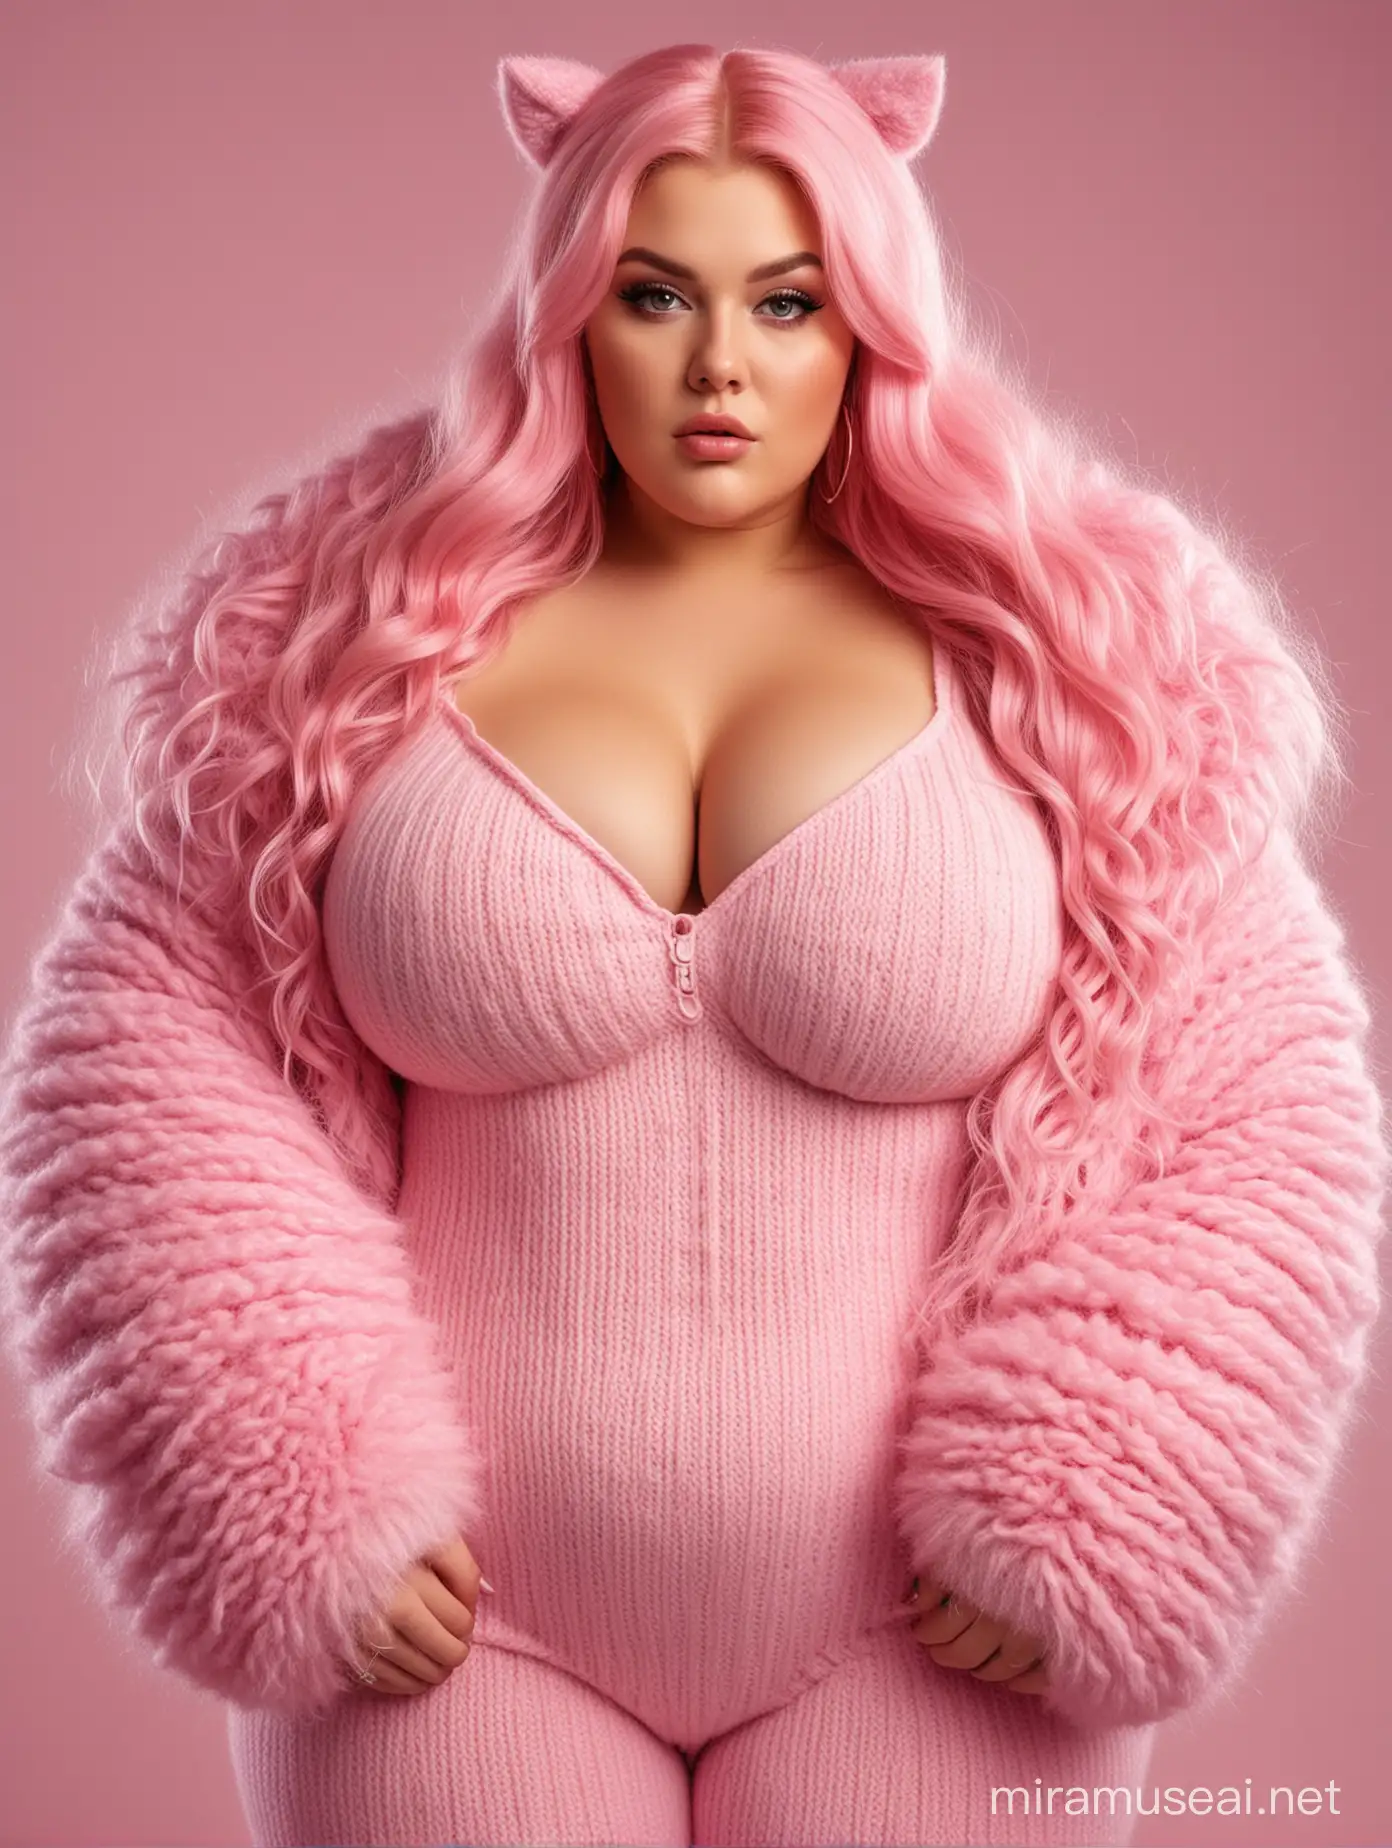 hyper-realistic photo of gorgeous plump curvy plus-size girl with huge round boobs, wearing a long cable-knitted fuzzy wool catsuit covered in long pink artificial hairs 